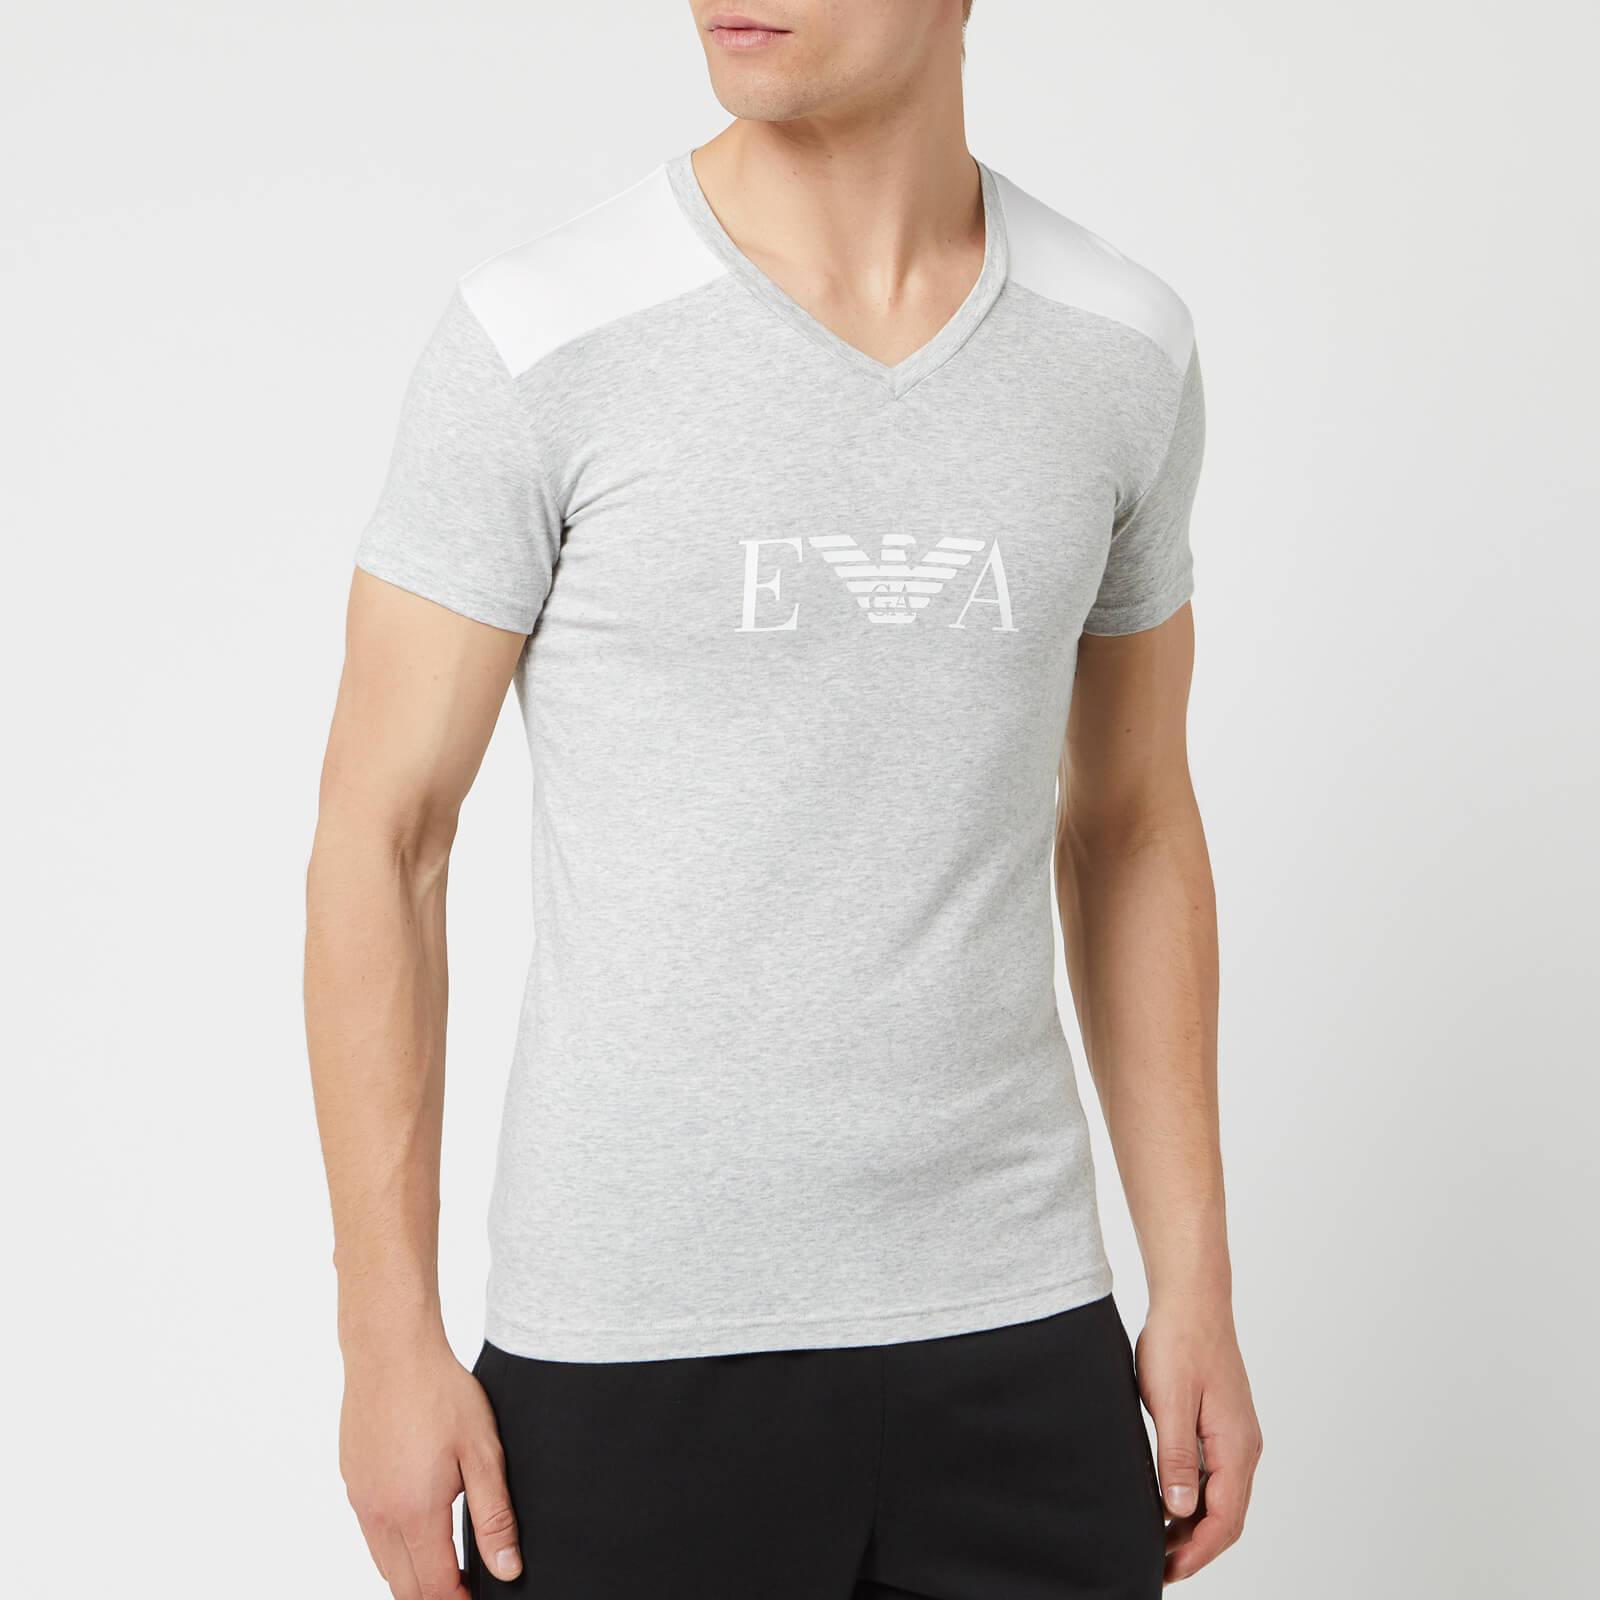 Emporio Armani Shoulder Detail T-shirt in Gray for Men - Lyst